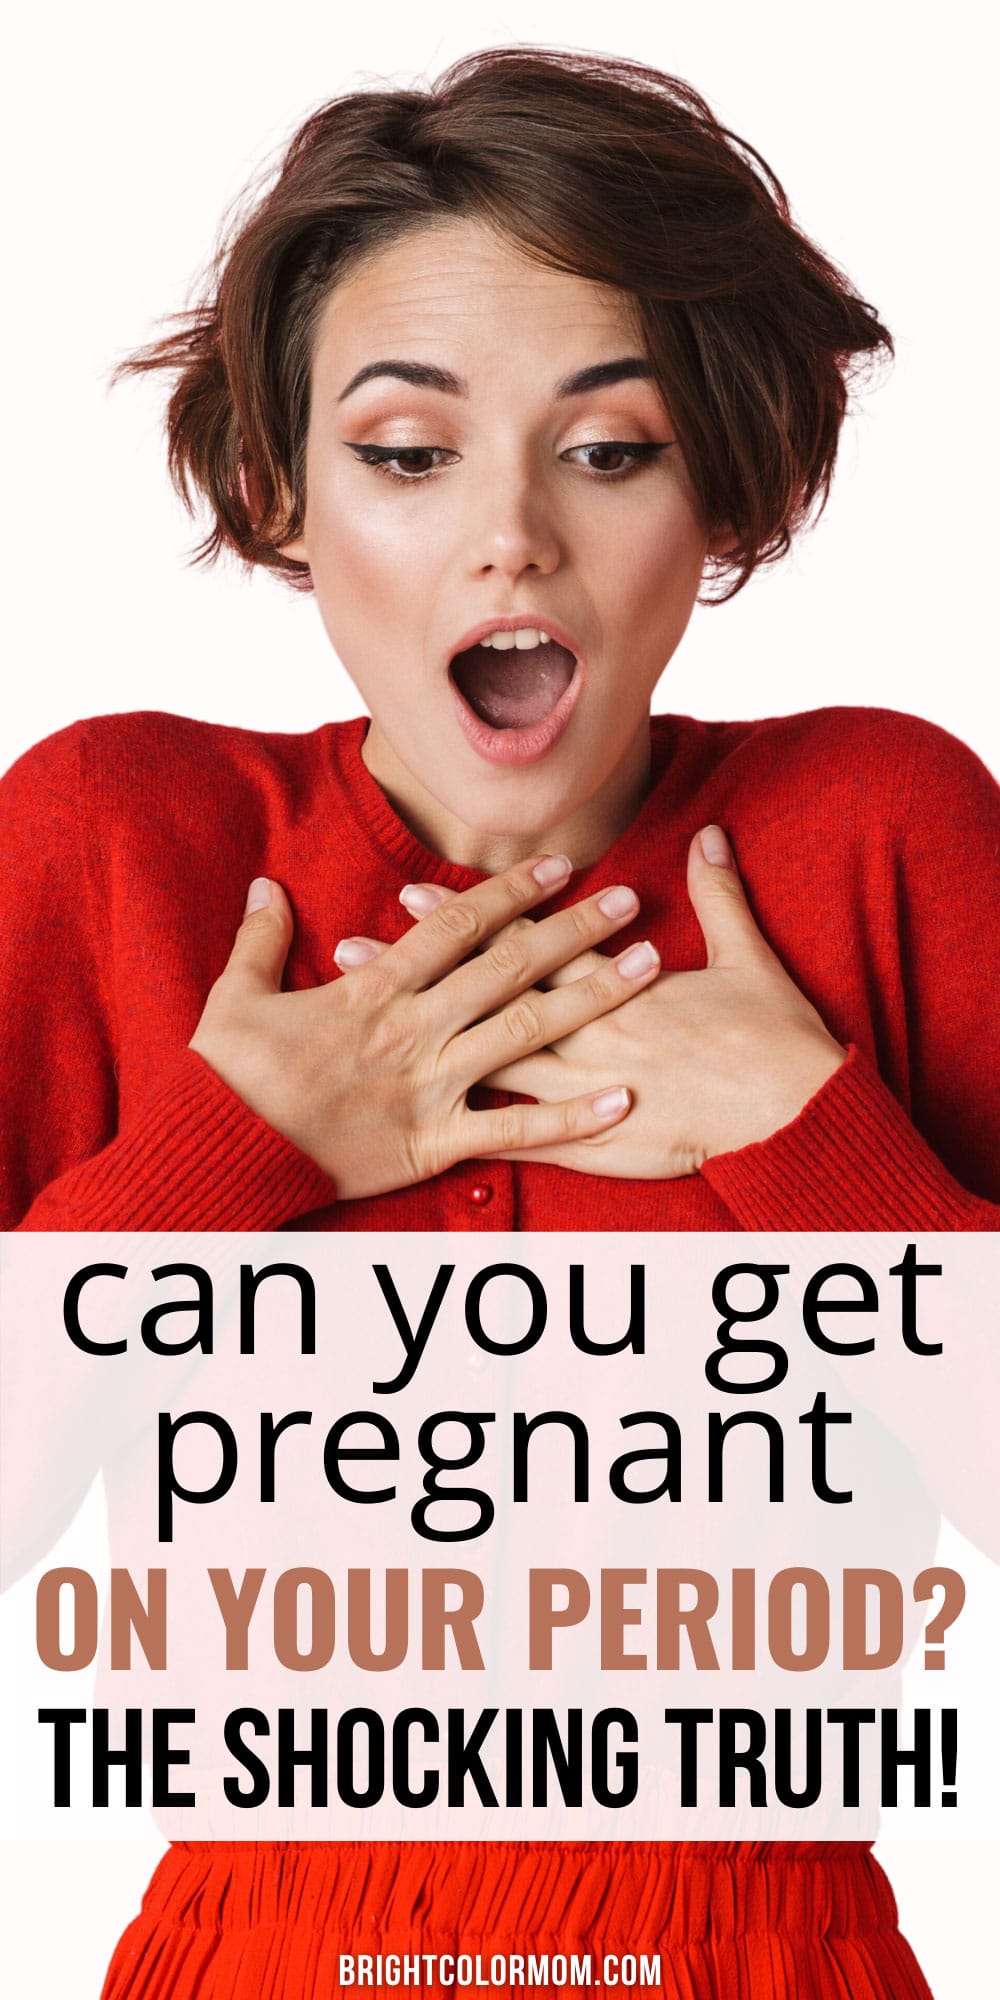 can you get pregnant 5 days before your period